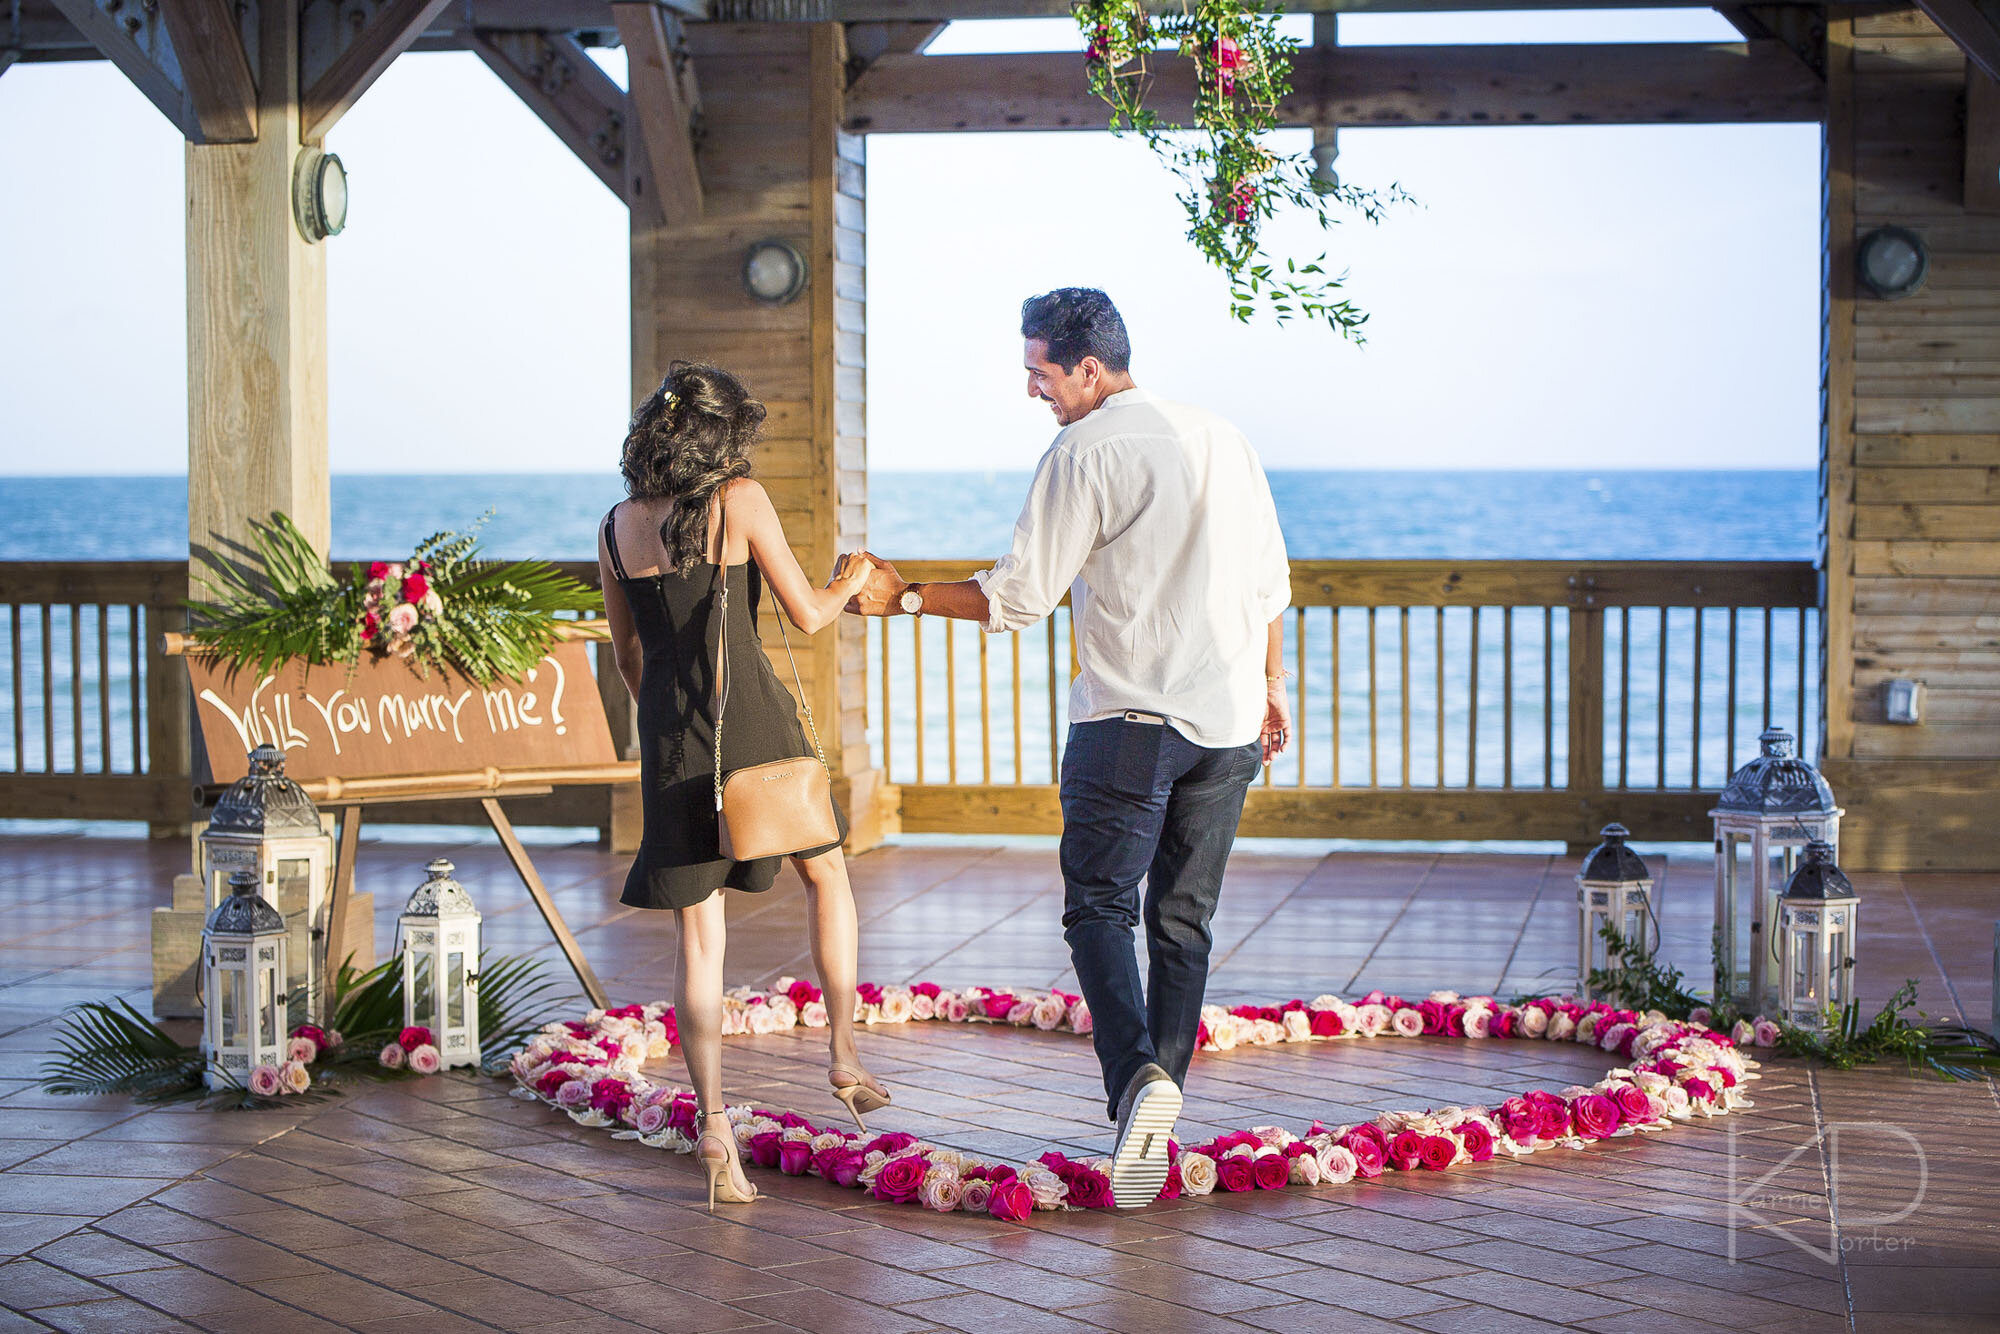  Pop the question in Key West 